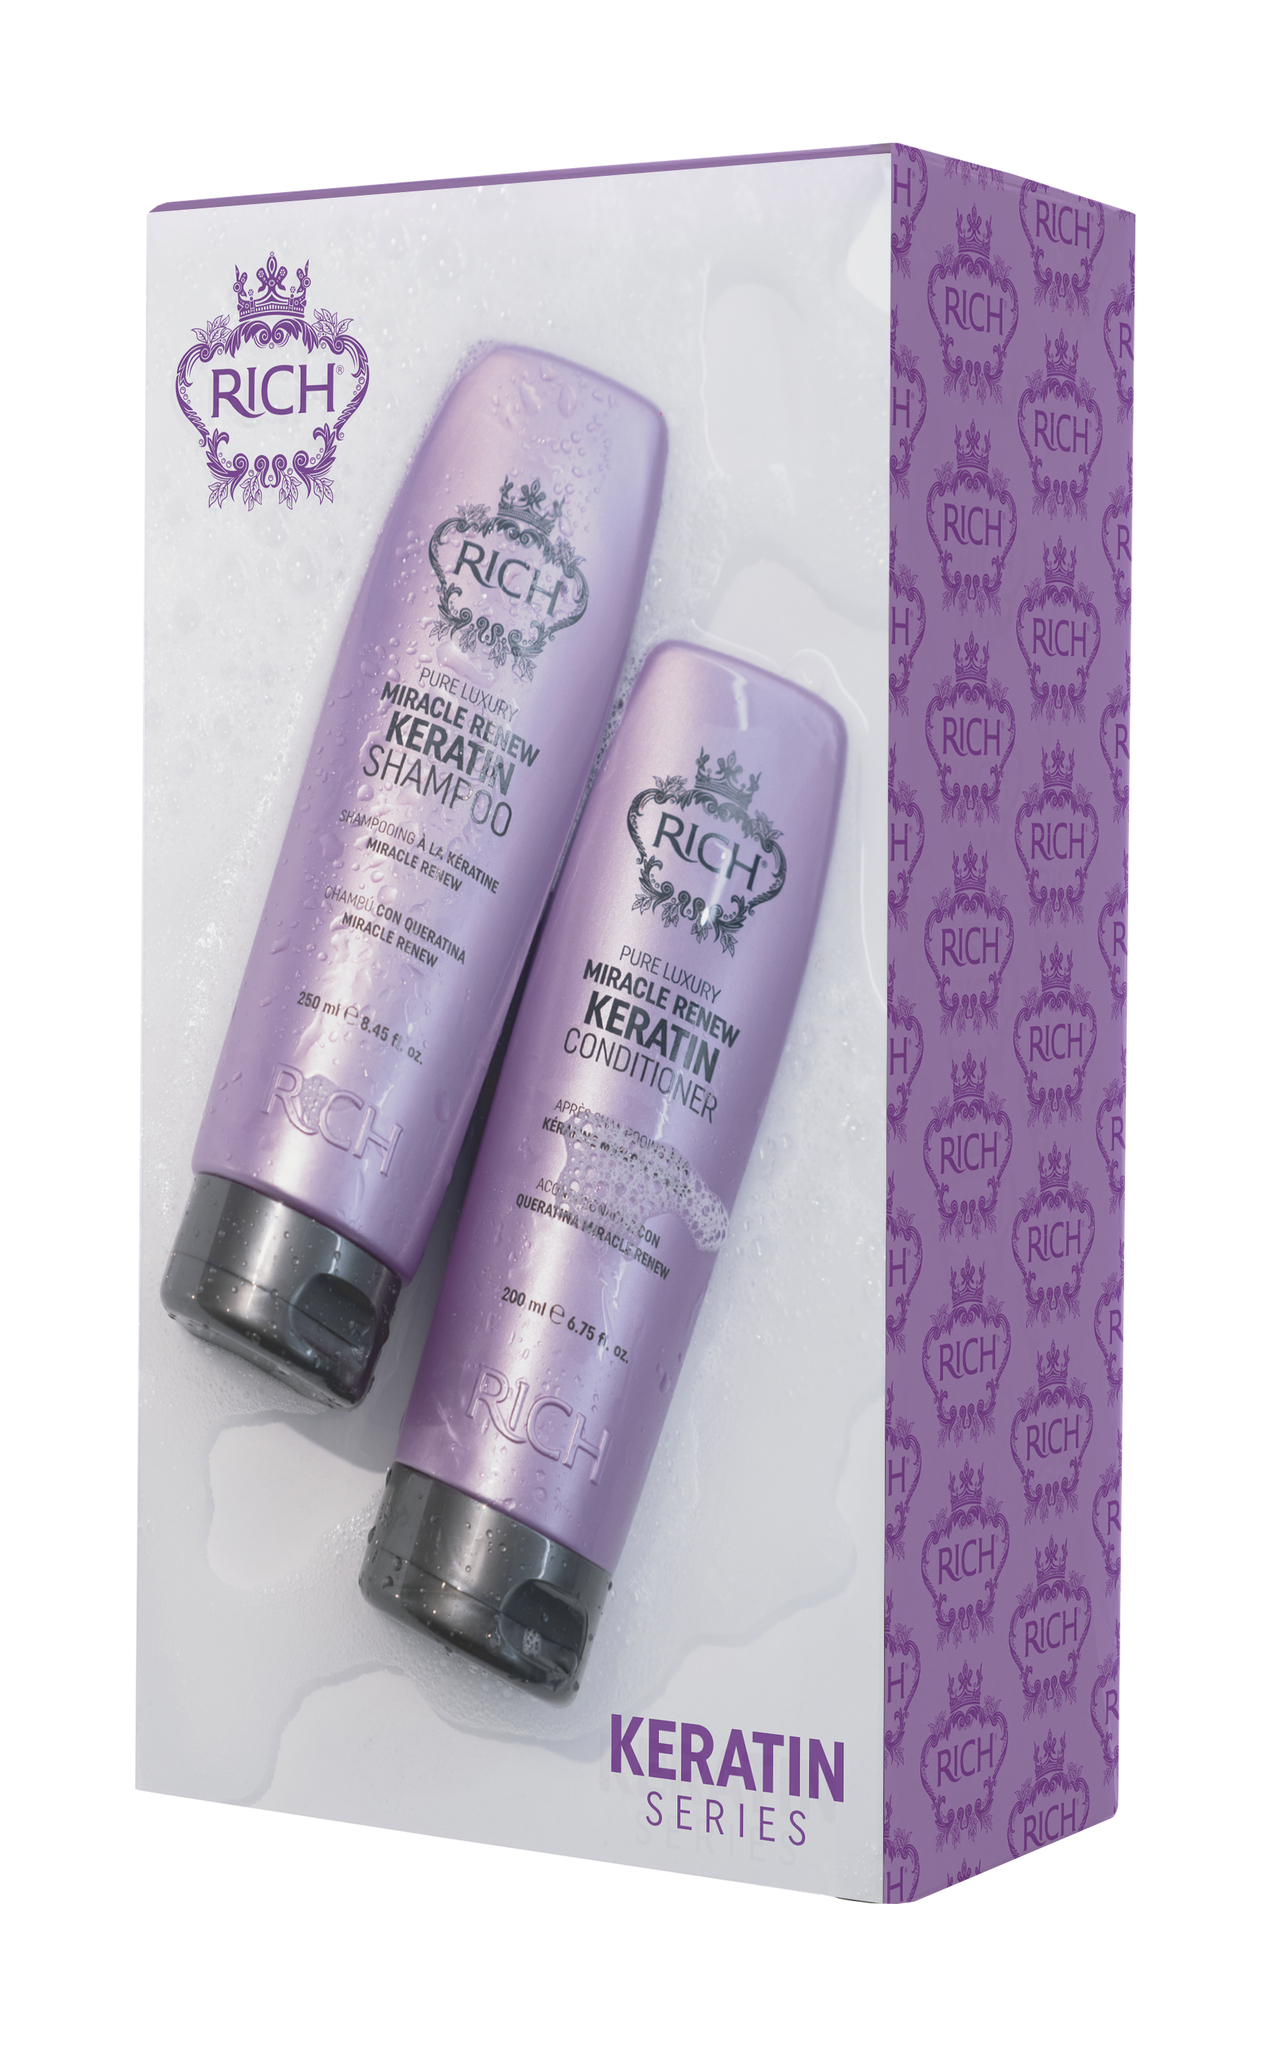 Rich Pure Luxury Keratin Series Duo, Repairing and protective set